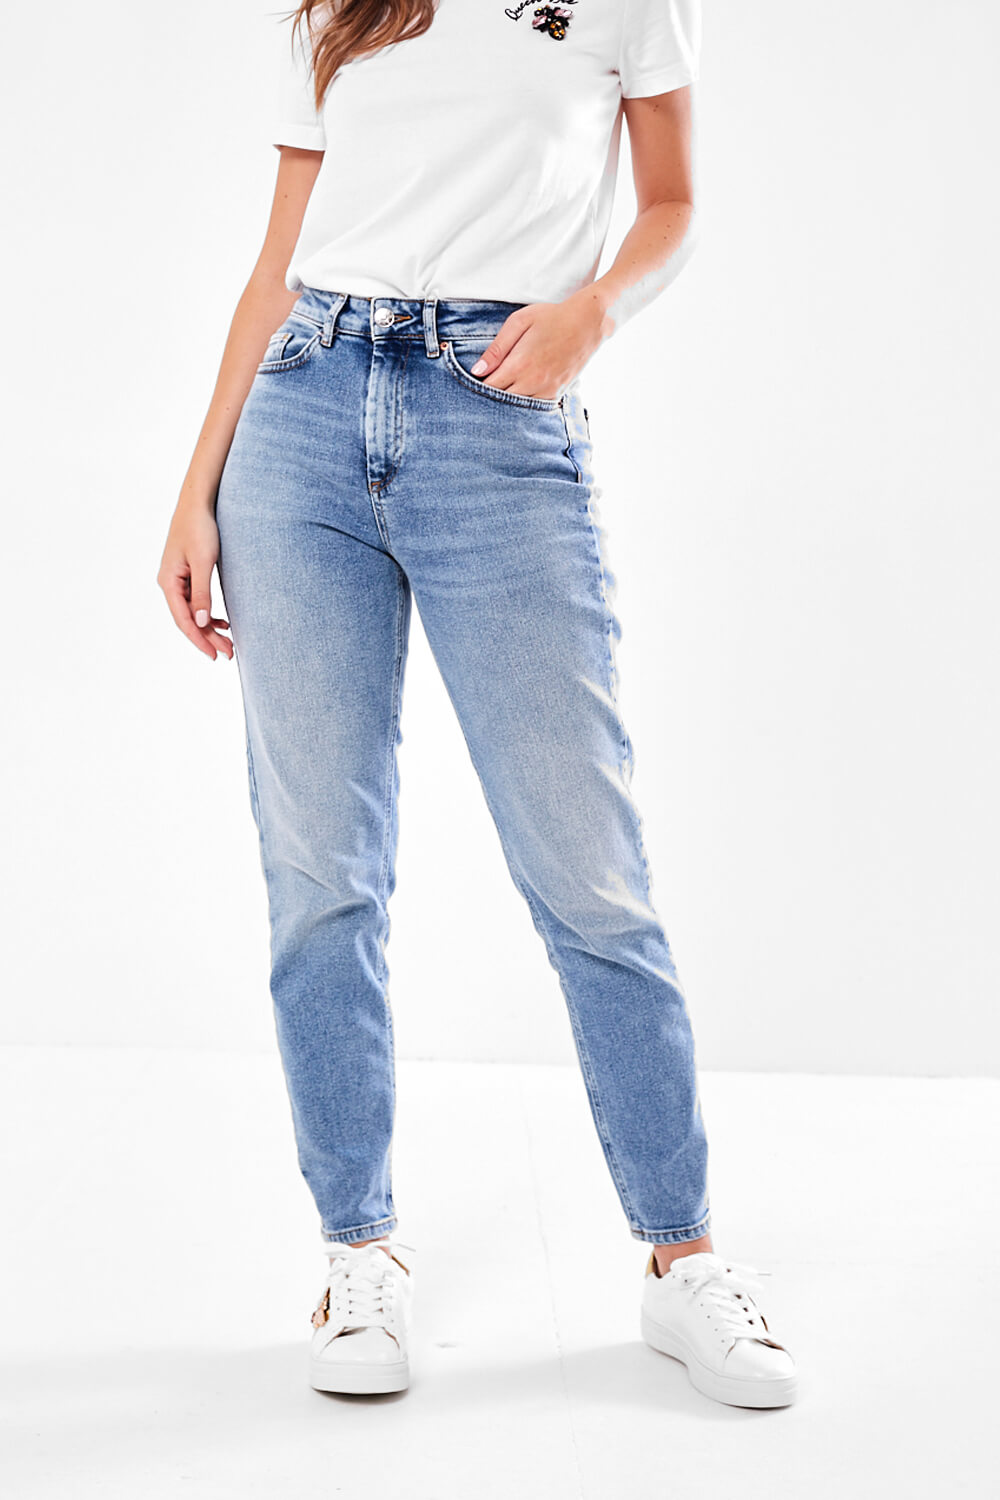 marmor Forudsætning tavle Only Veneda High Rise Mom Jeans in Light Blue | iCLOTHING - iCLOTHING